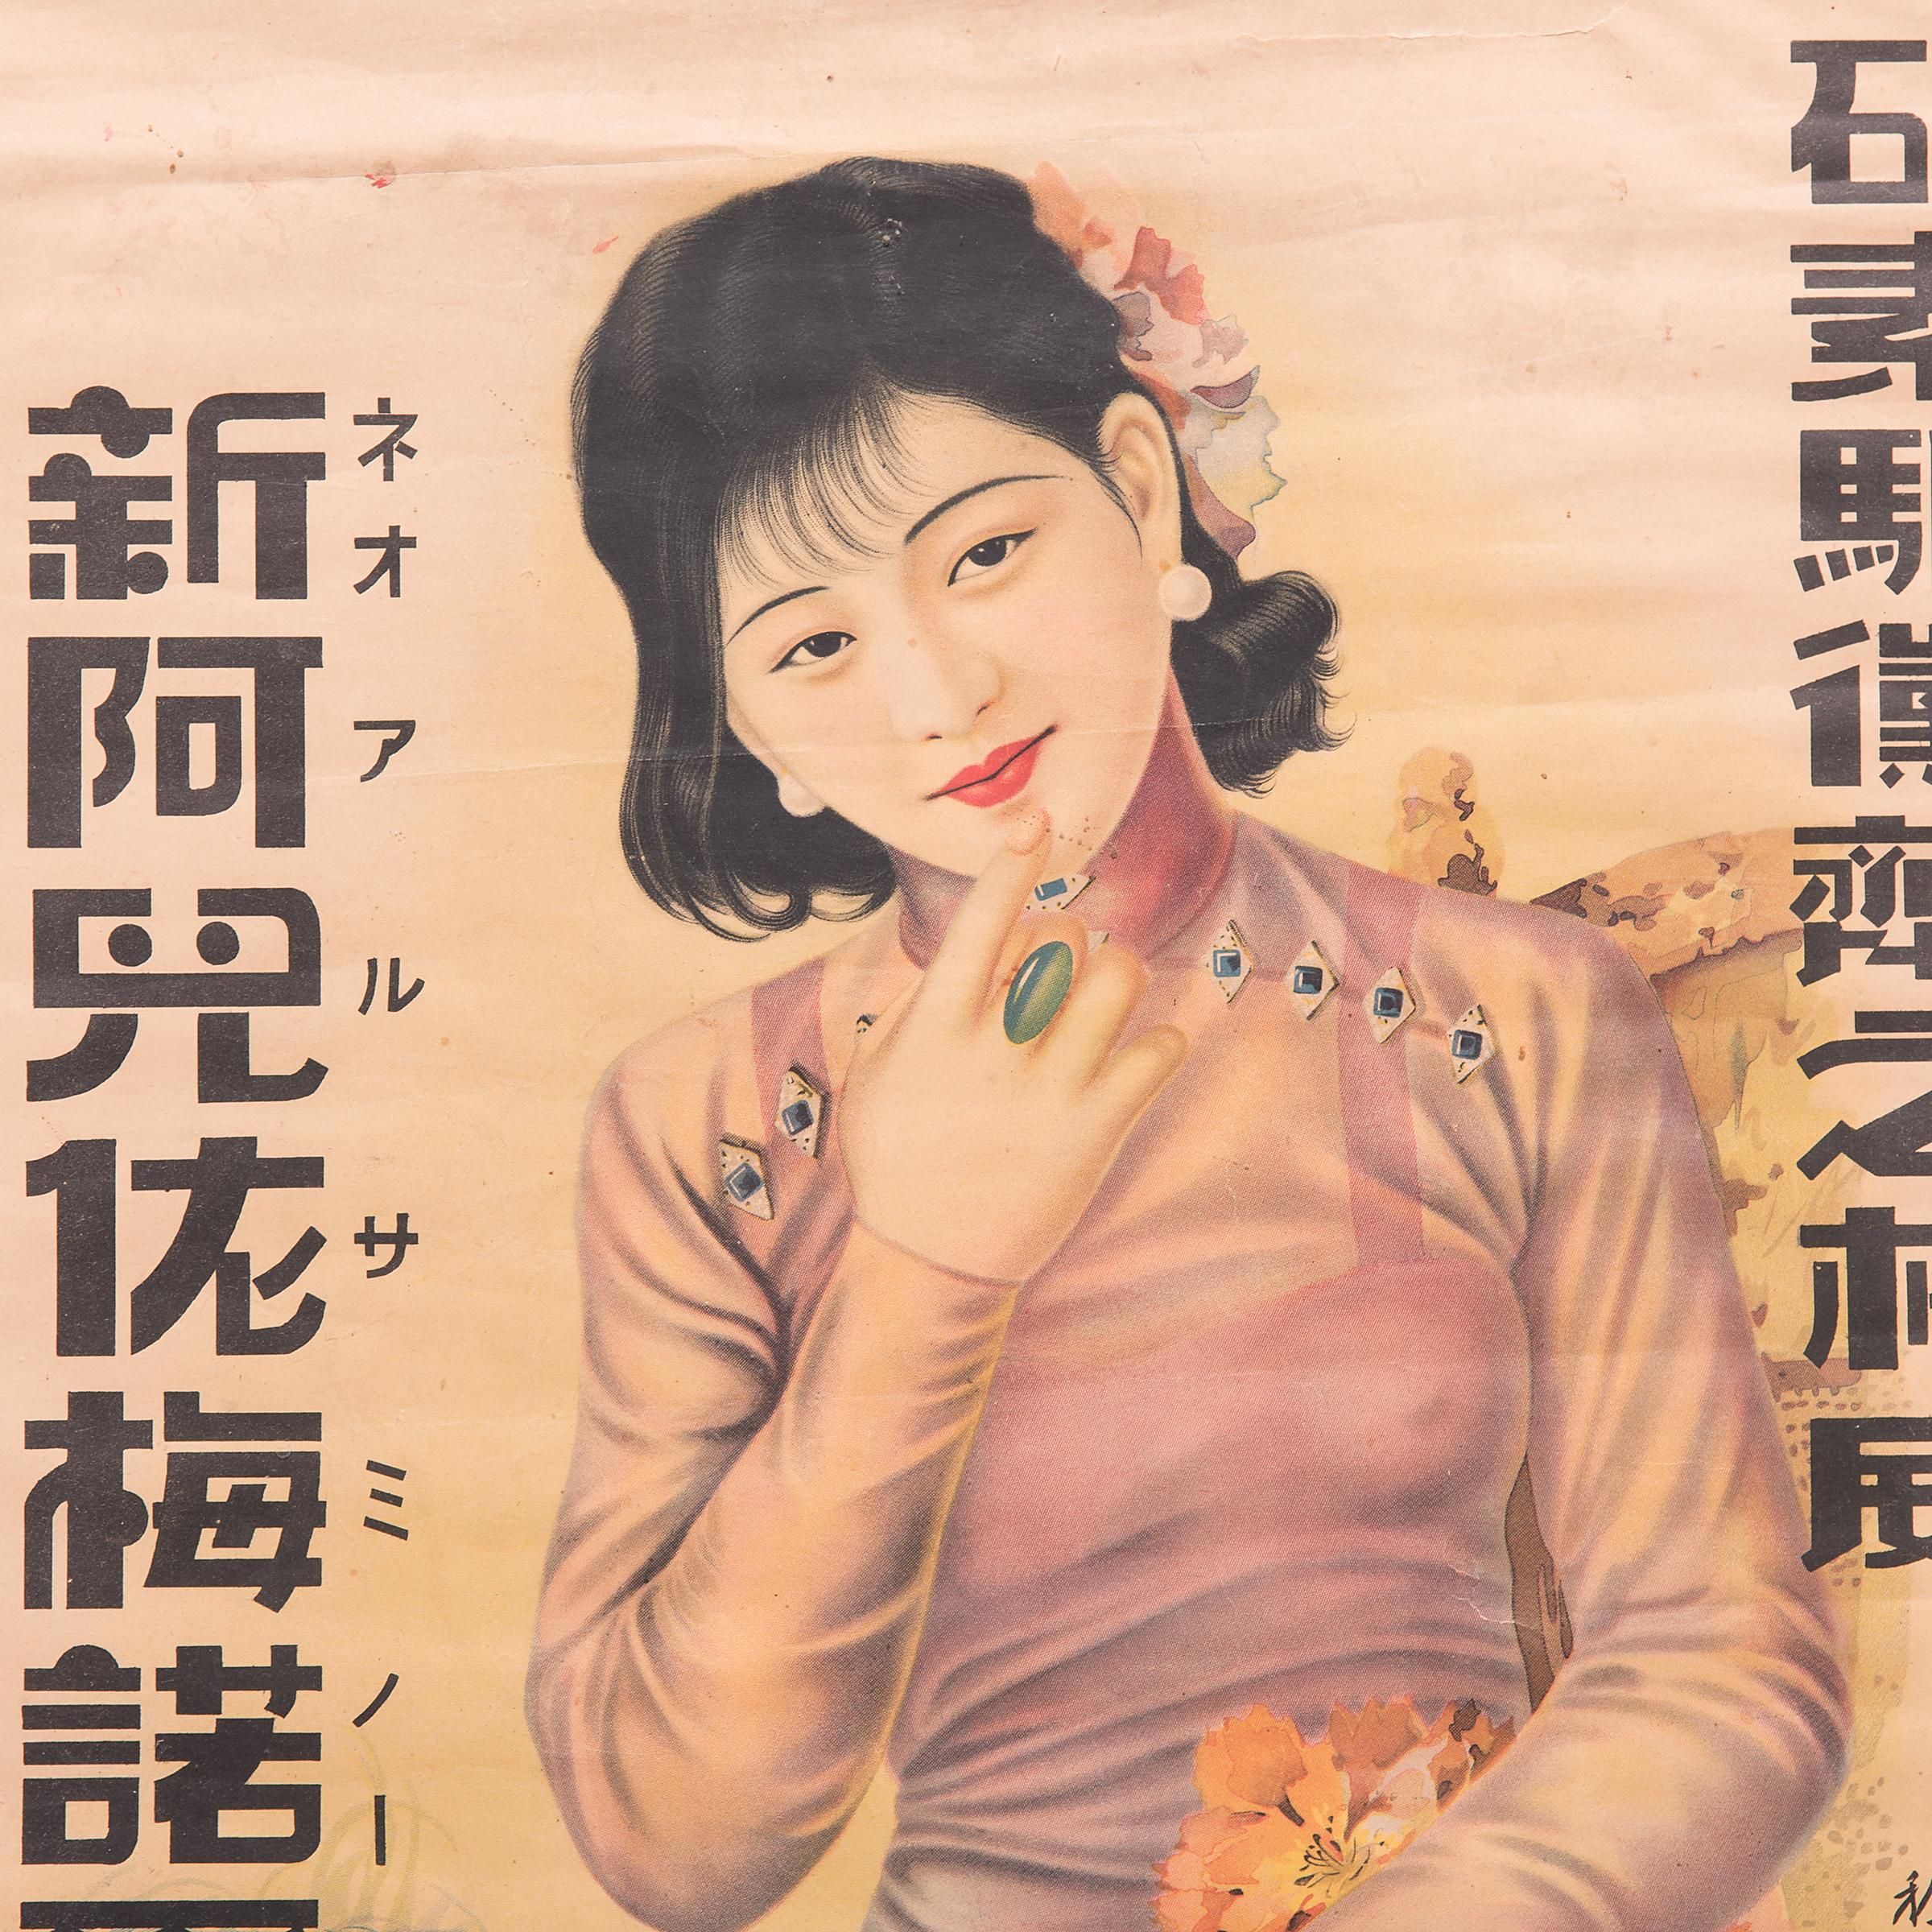 This advertising poster from the 1930s for a Japanese company operating in China melds the meticulous detail of traditional Chinese painting with the craft of color lithography that was popularized during the economic boom of early 20th century